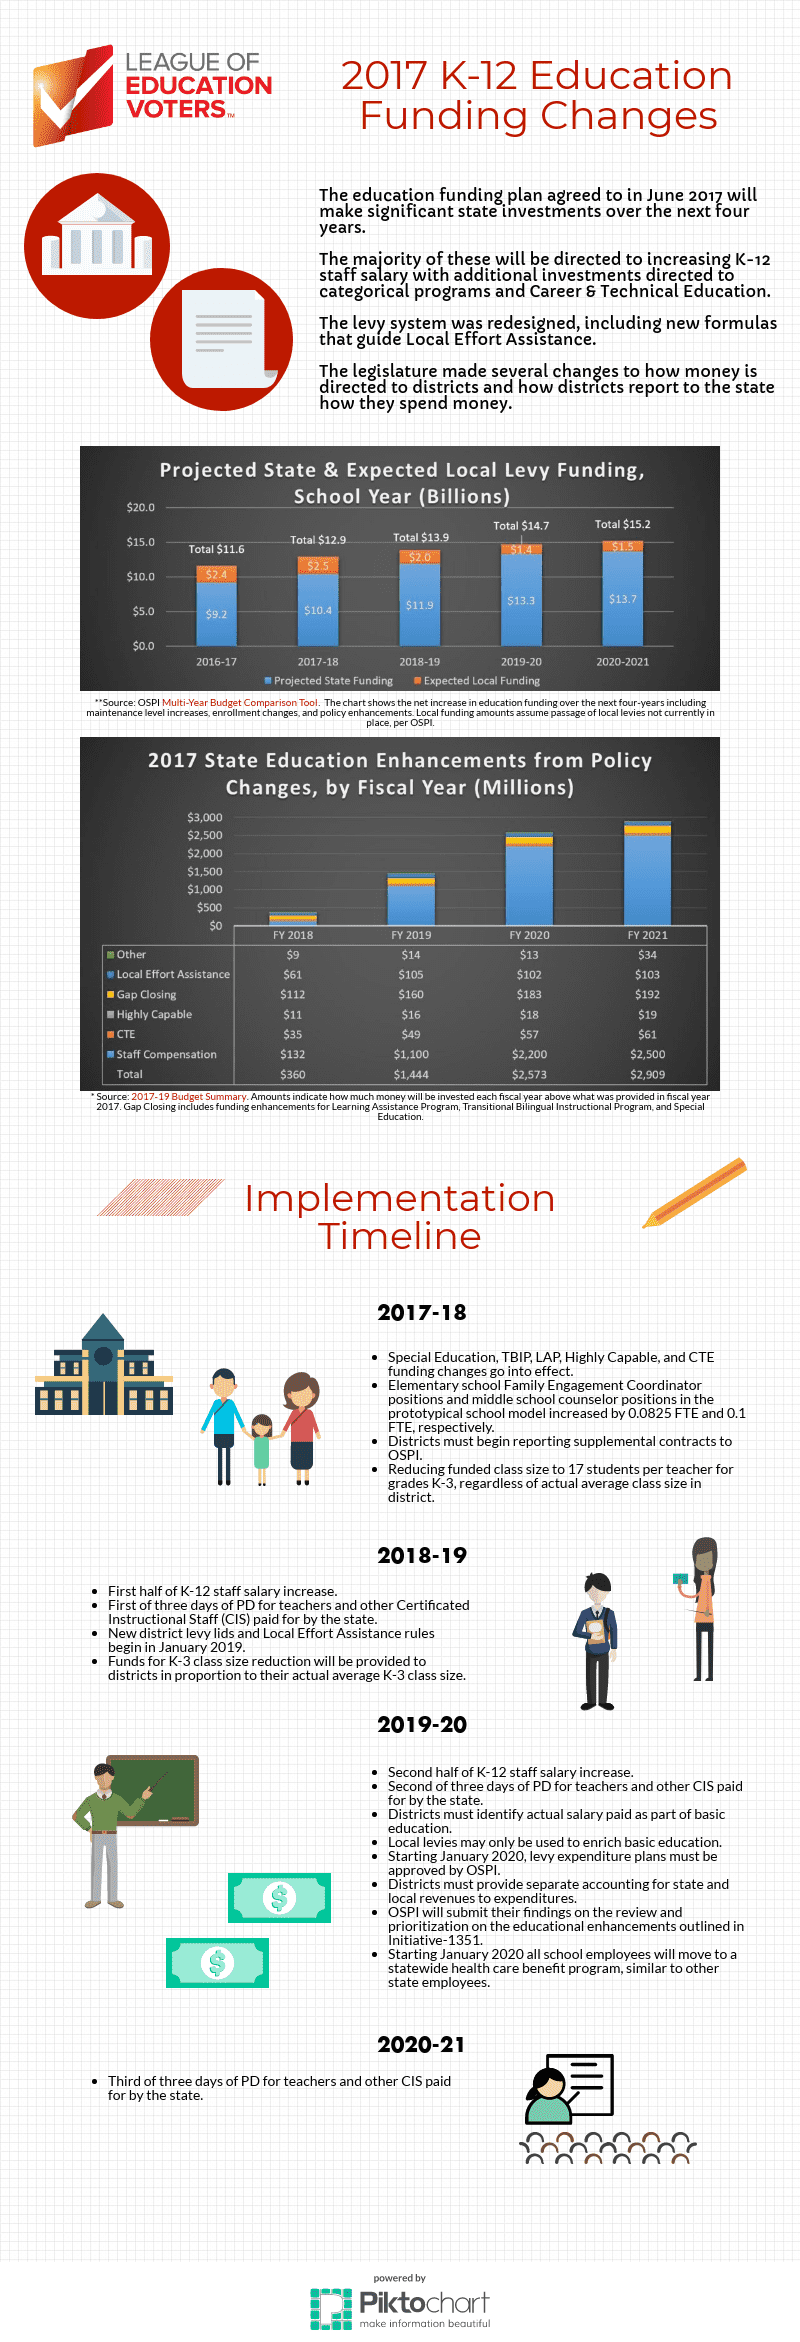 2017 K-12 Education Funding Changes Infographic